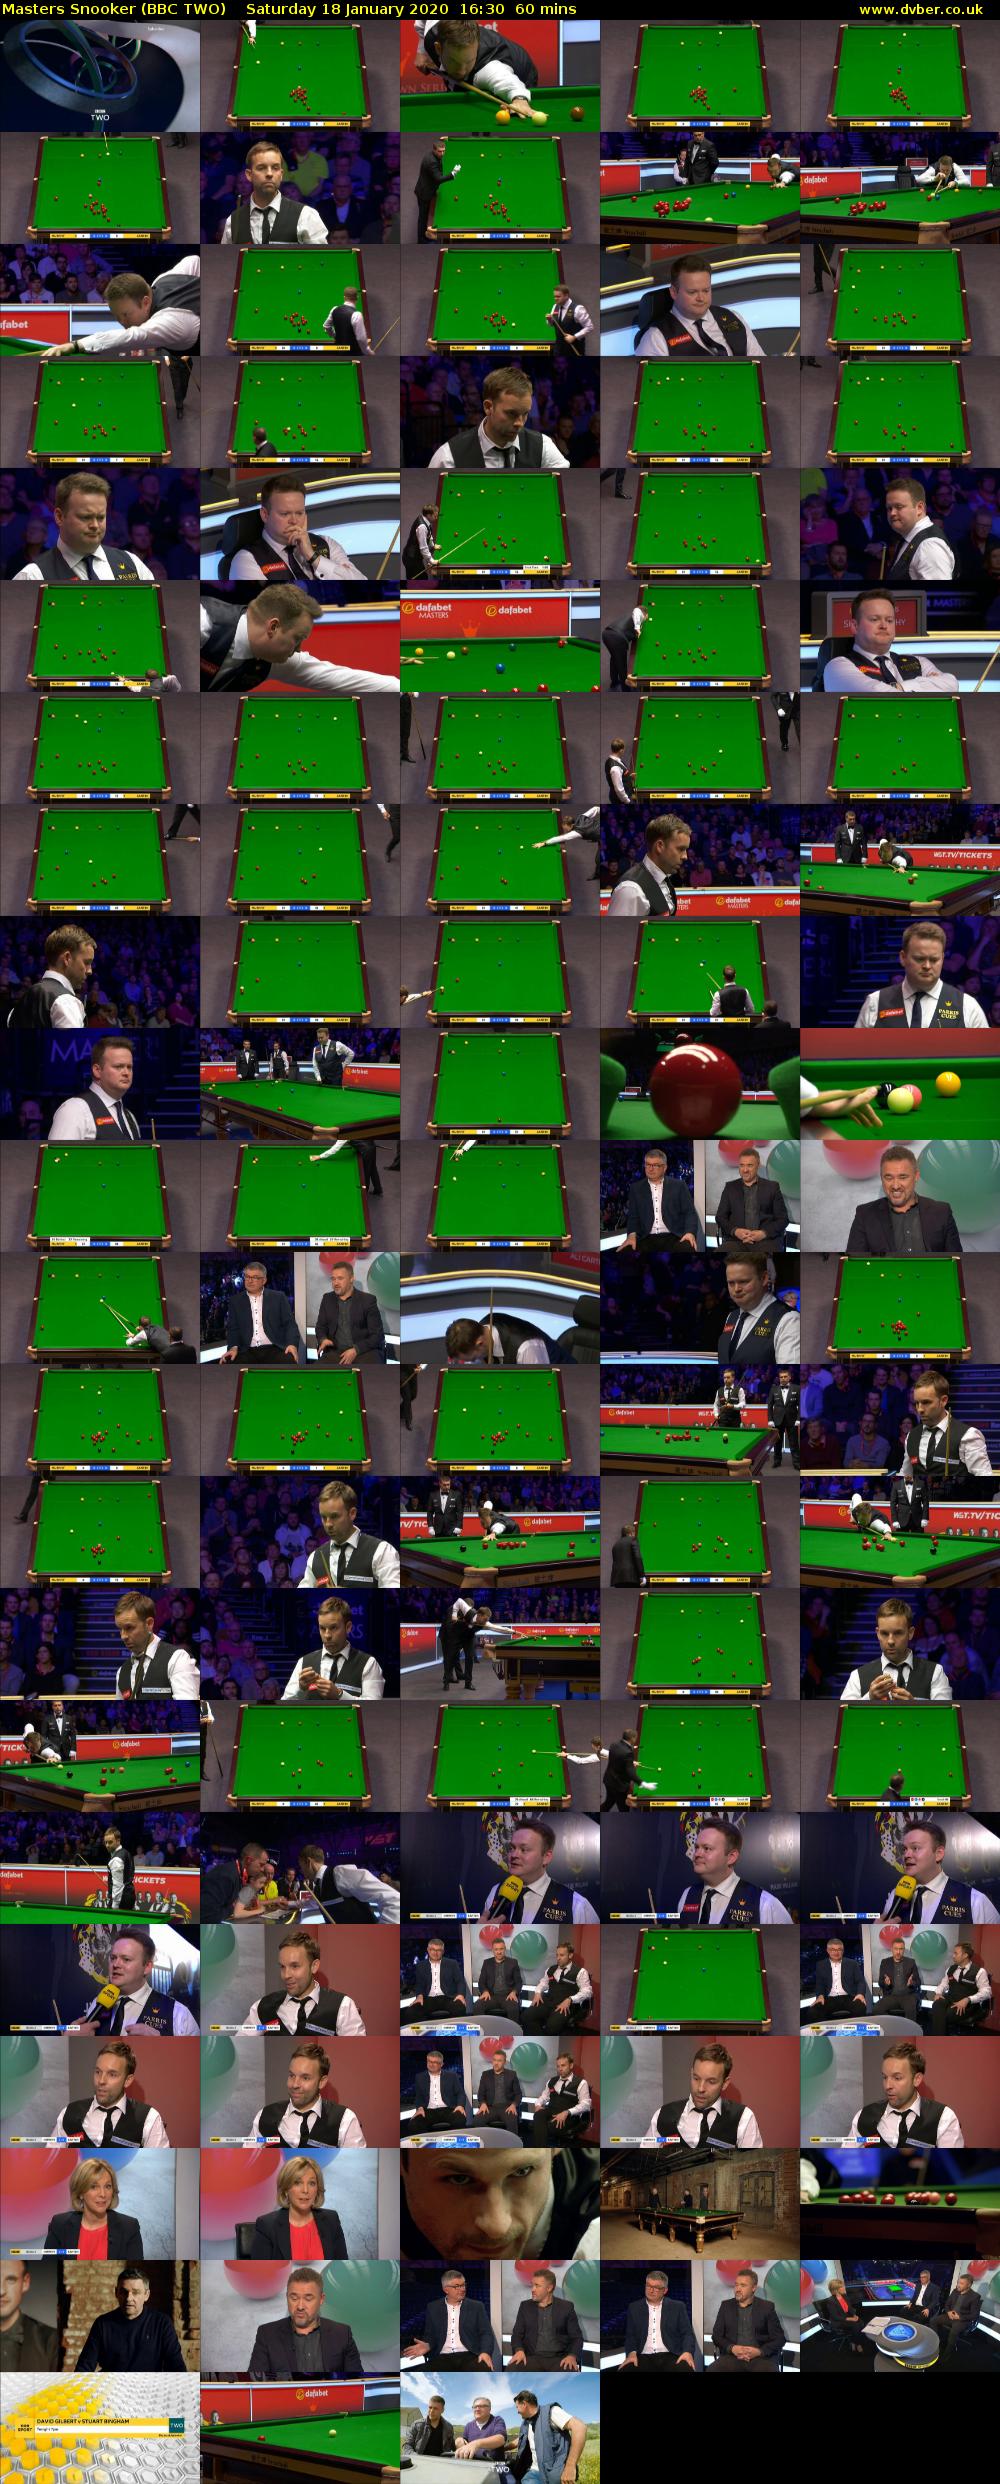 Masters Snooker (BBC TWO) Saturday 18 January 2020 16:30 - 17:30